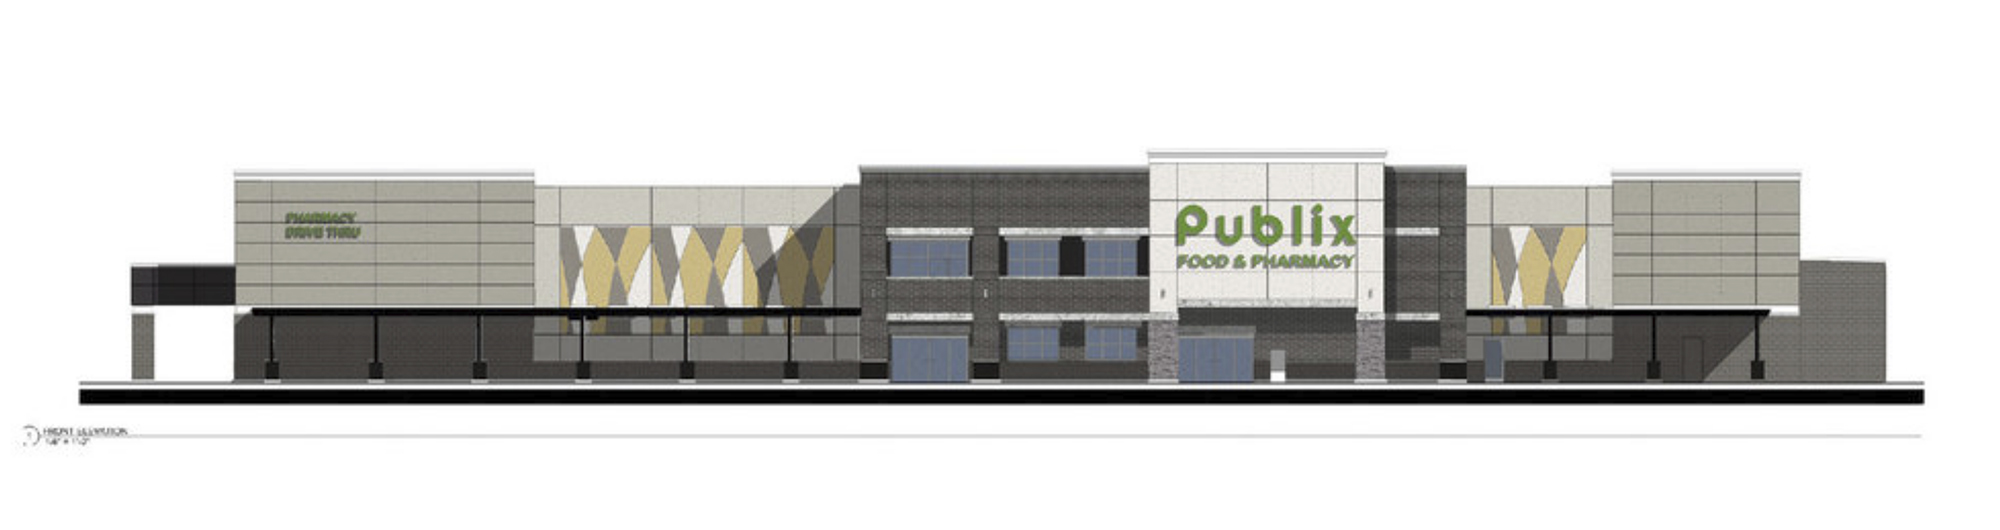 Plans show an almost 50,000-square-foot Publix Super Markets Inc. store and 18,000 square feet of adjacent retail space.